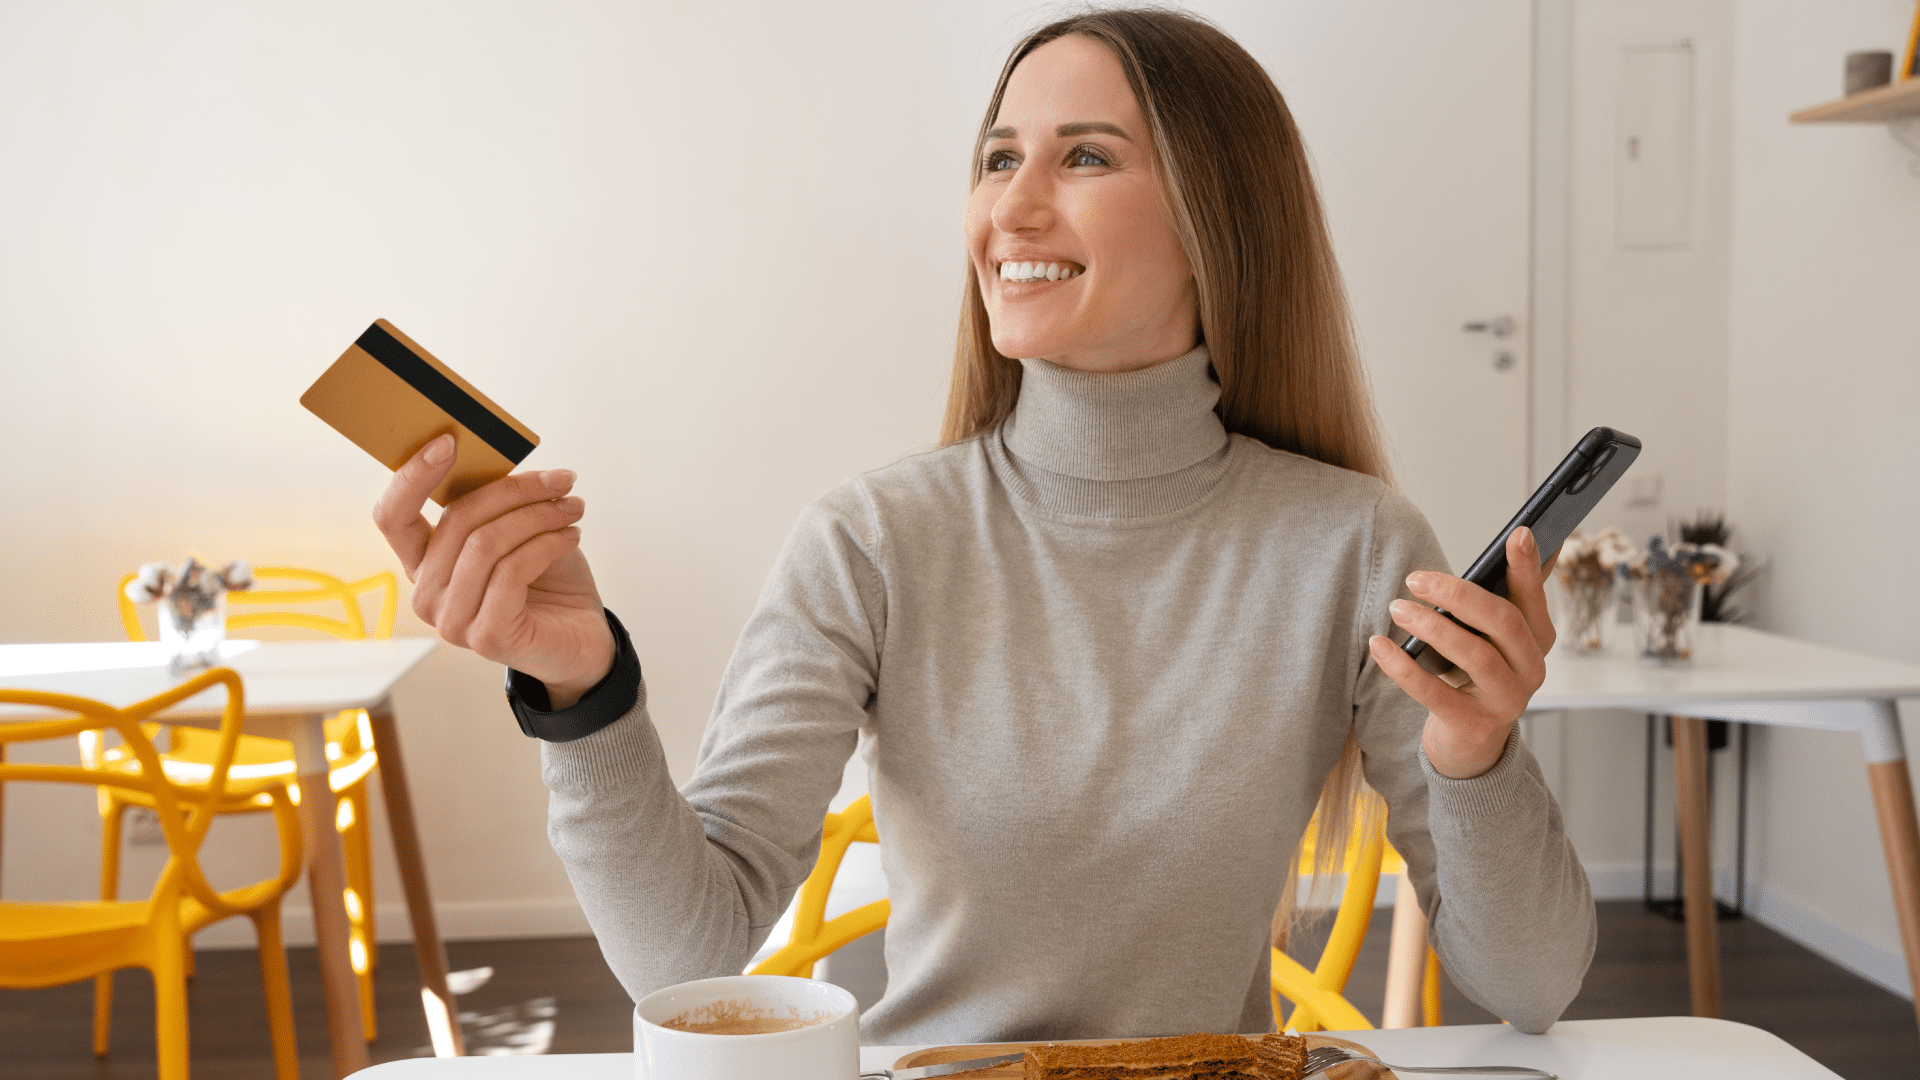 Image showing a woman handling a credit card transaction.